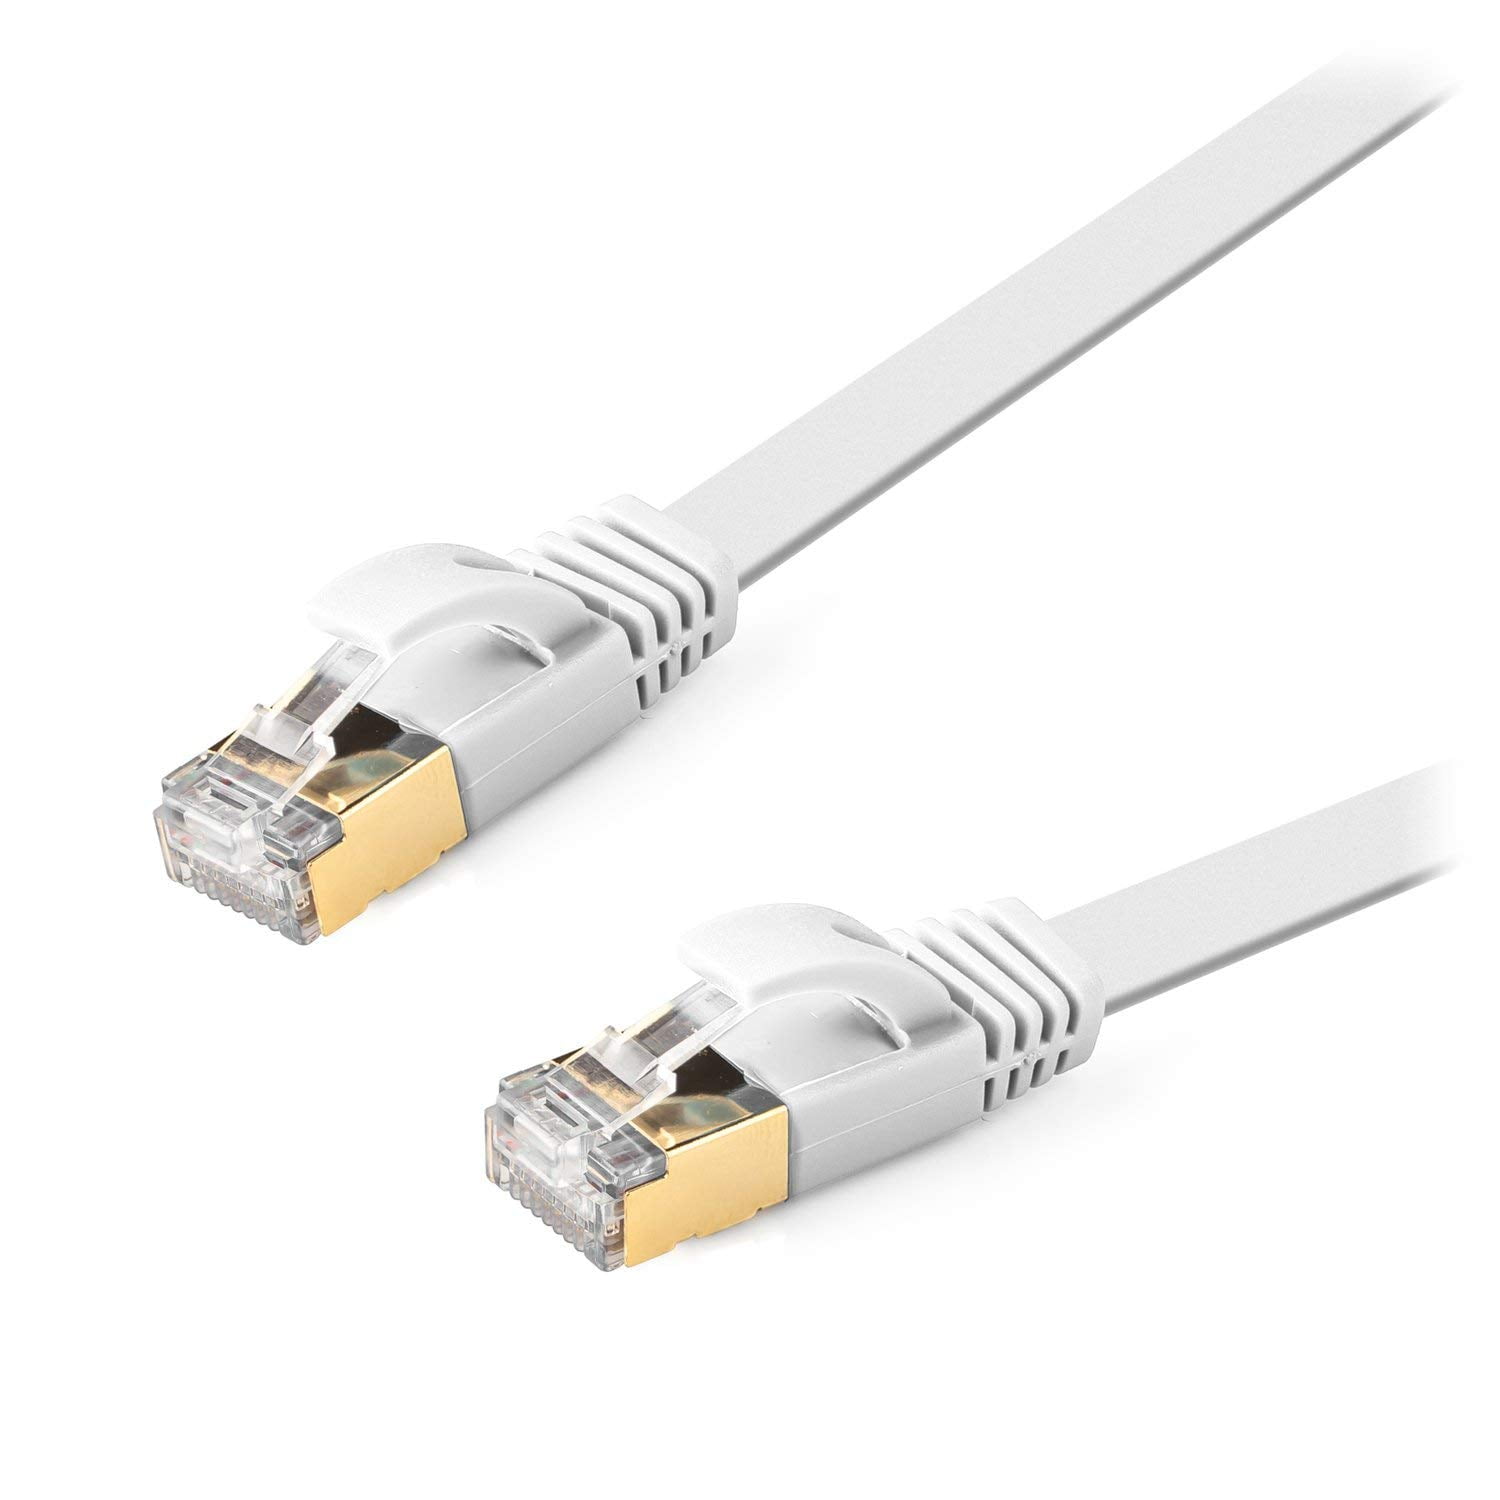 50' Feet Ethernet Network Patch Cat6 Cable for Xbox PC \ Modem PS4 \ PS3 \ Router (50ft) - Flat White - Walmart.com